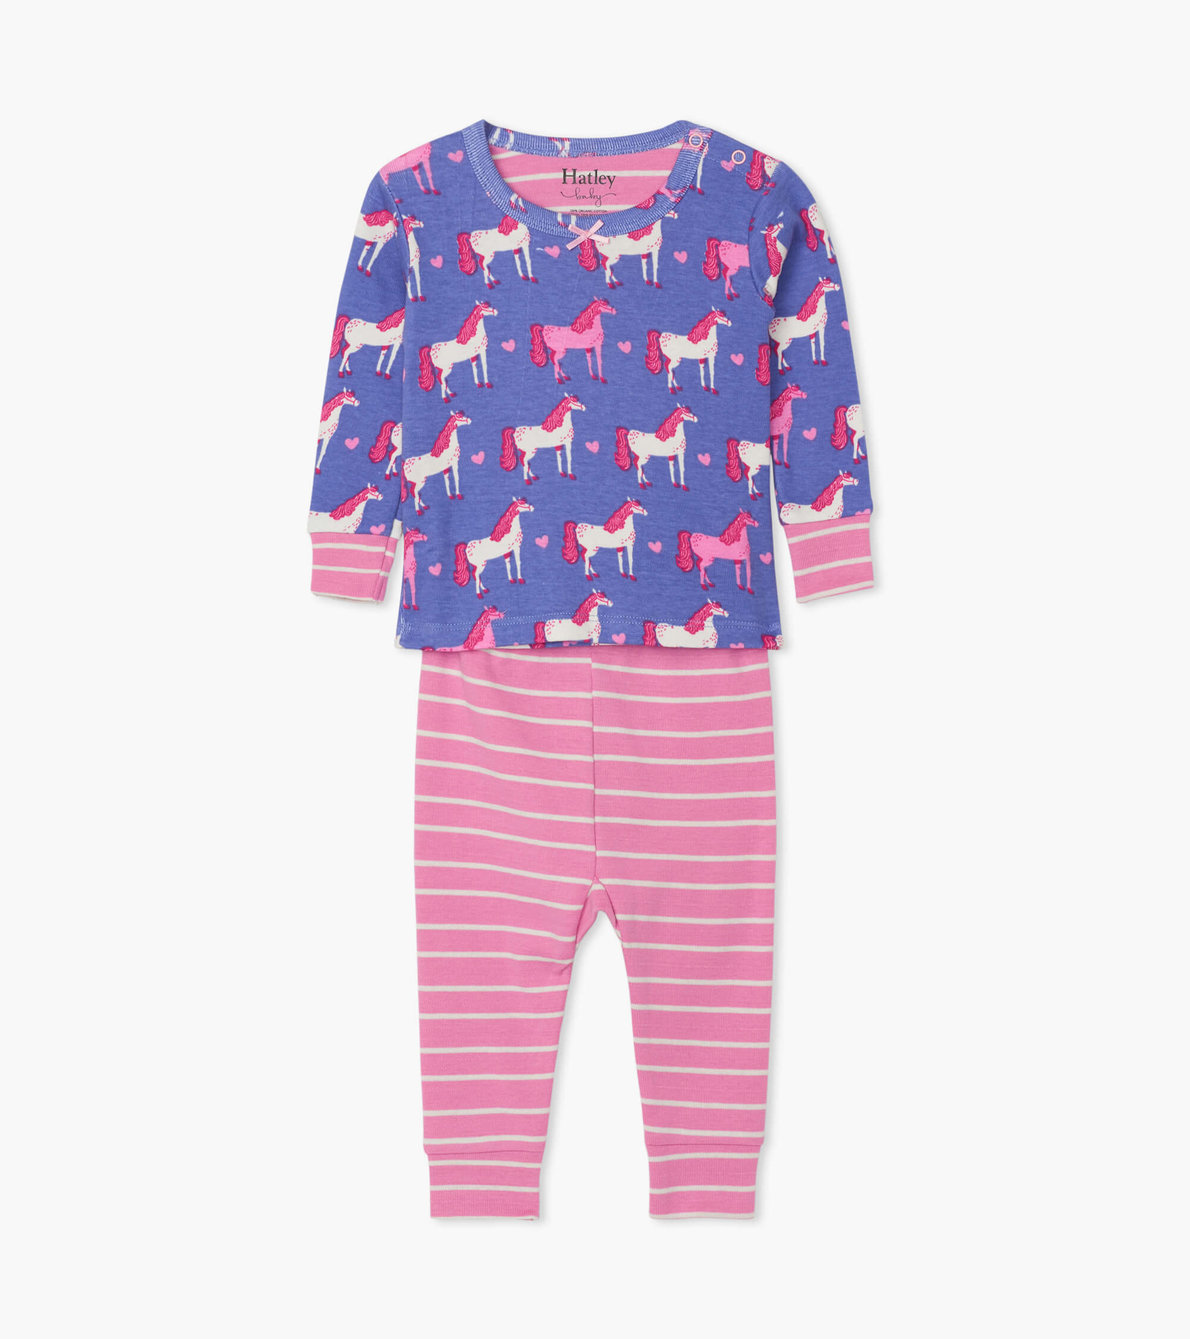 View larger image of Hearts and Horses Organic Cotton Baby Pajama Set